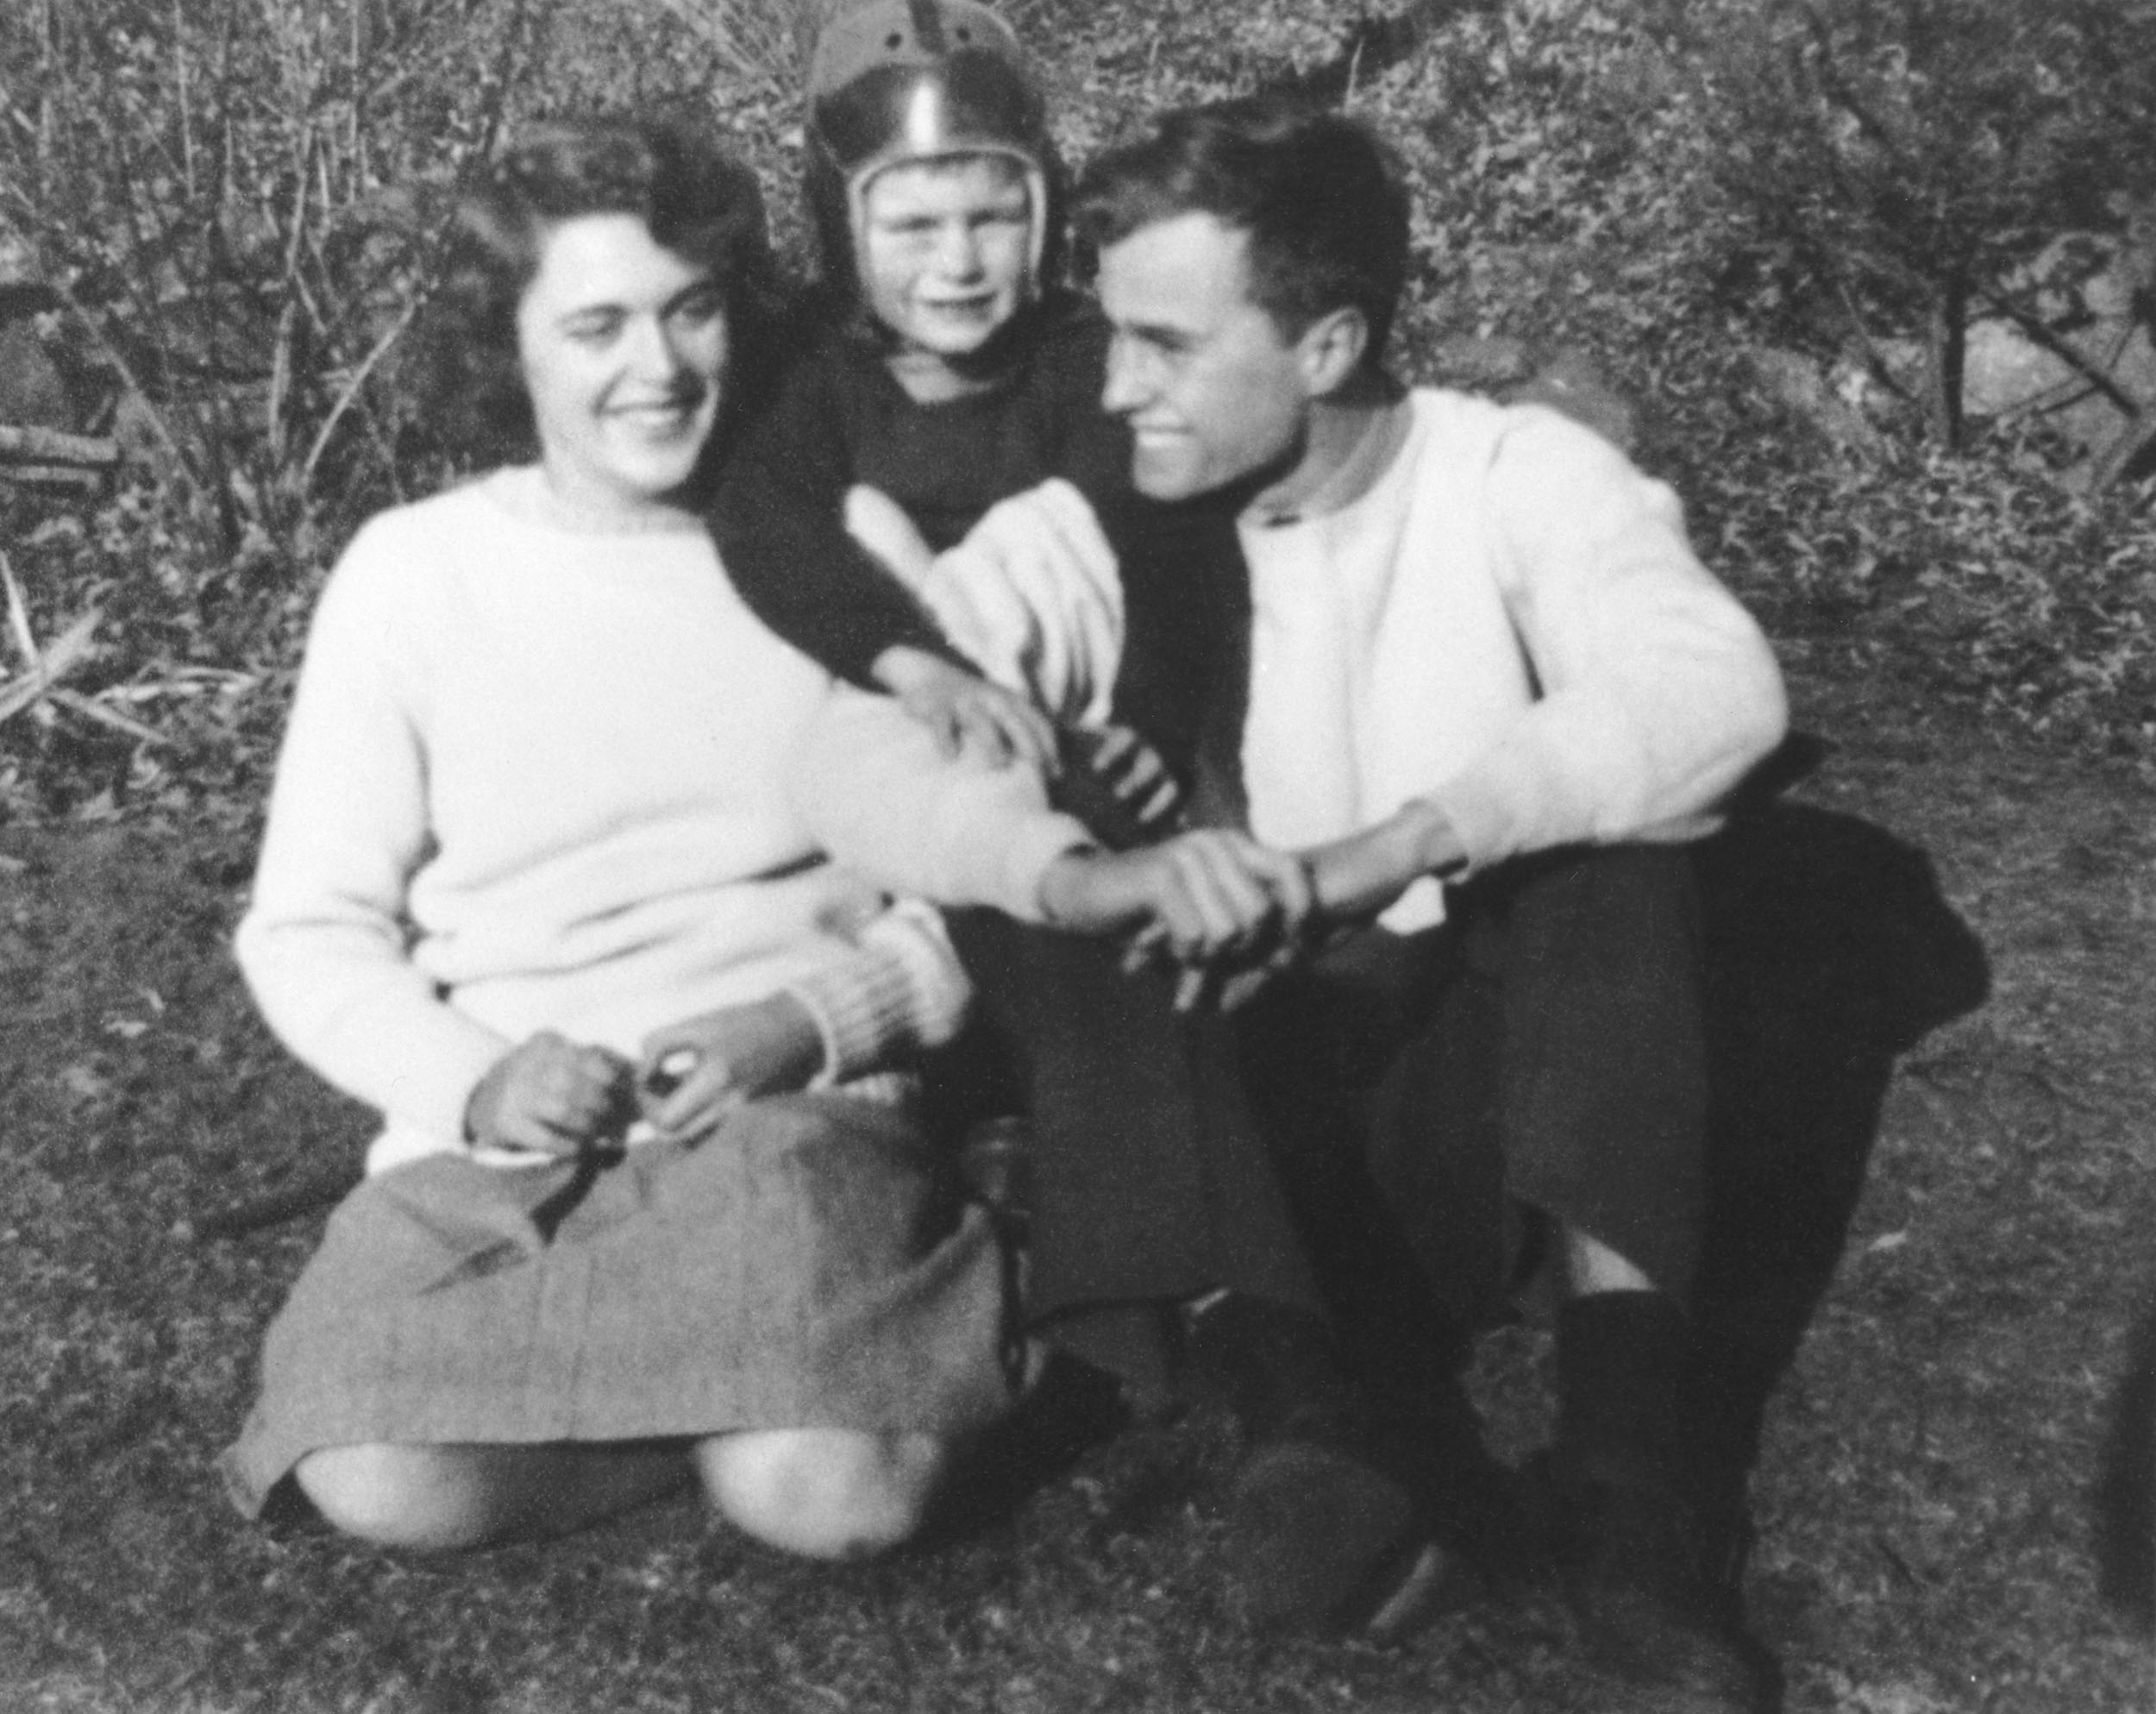 George Herbert Walker Bush (R) poses with his wife Barbara and his brother Bucky in the 1940's. Born 12 June 1924 in Milton, Massachussetts, George Bush Yale graduated with a degree in Economics in 1948, made a fortune drilling oil before entering politics in 1964. US Congressman from Texas (1966-1970), ambassador to the United nations (1971-1974), Special Envoy to China (1974-1975), Republican National Chairman (1975-1976), Central Intelligence Agency (CIA) director (1976-1977), vice president of the US (1981-1959) George Bush is eventually elected president of the US 08 November 1988 against Democratic nominee Michael Dukakis. AFP PHOTO/WHITE HOUSE 